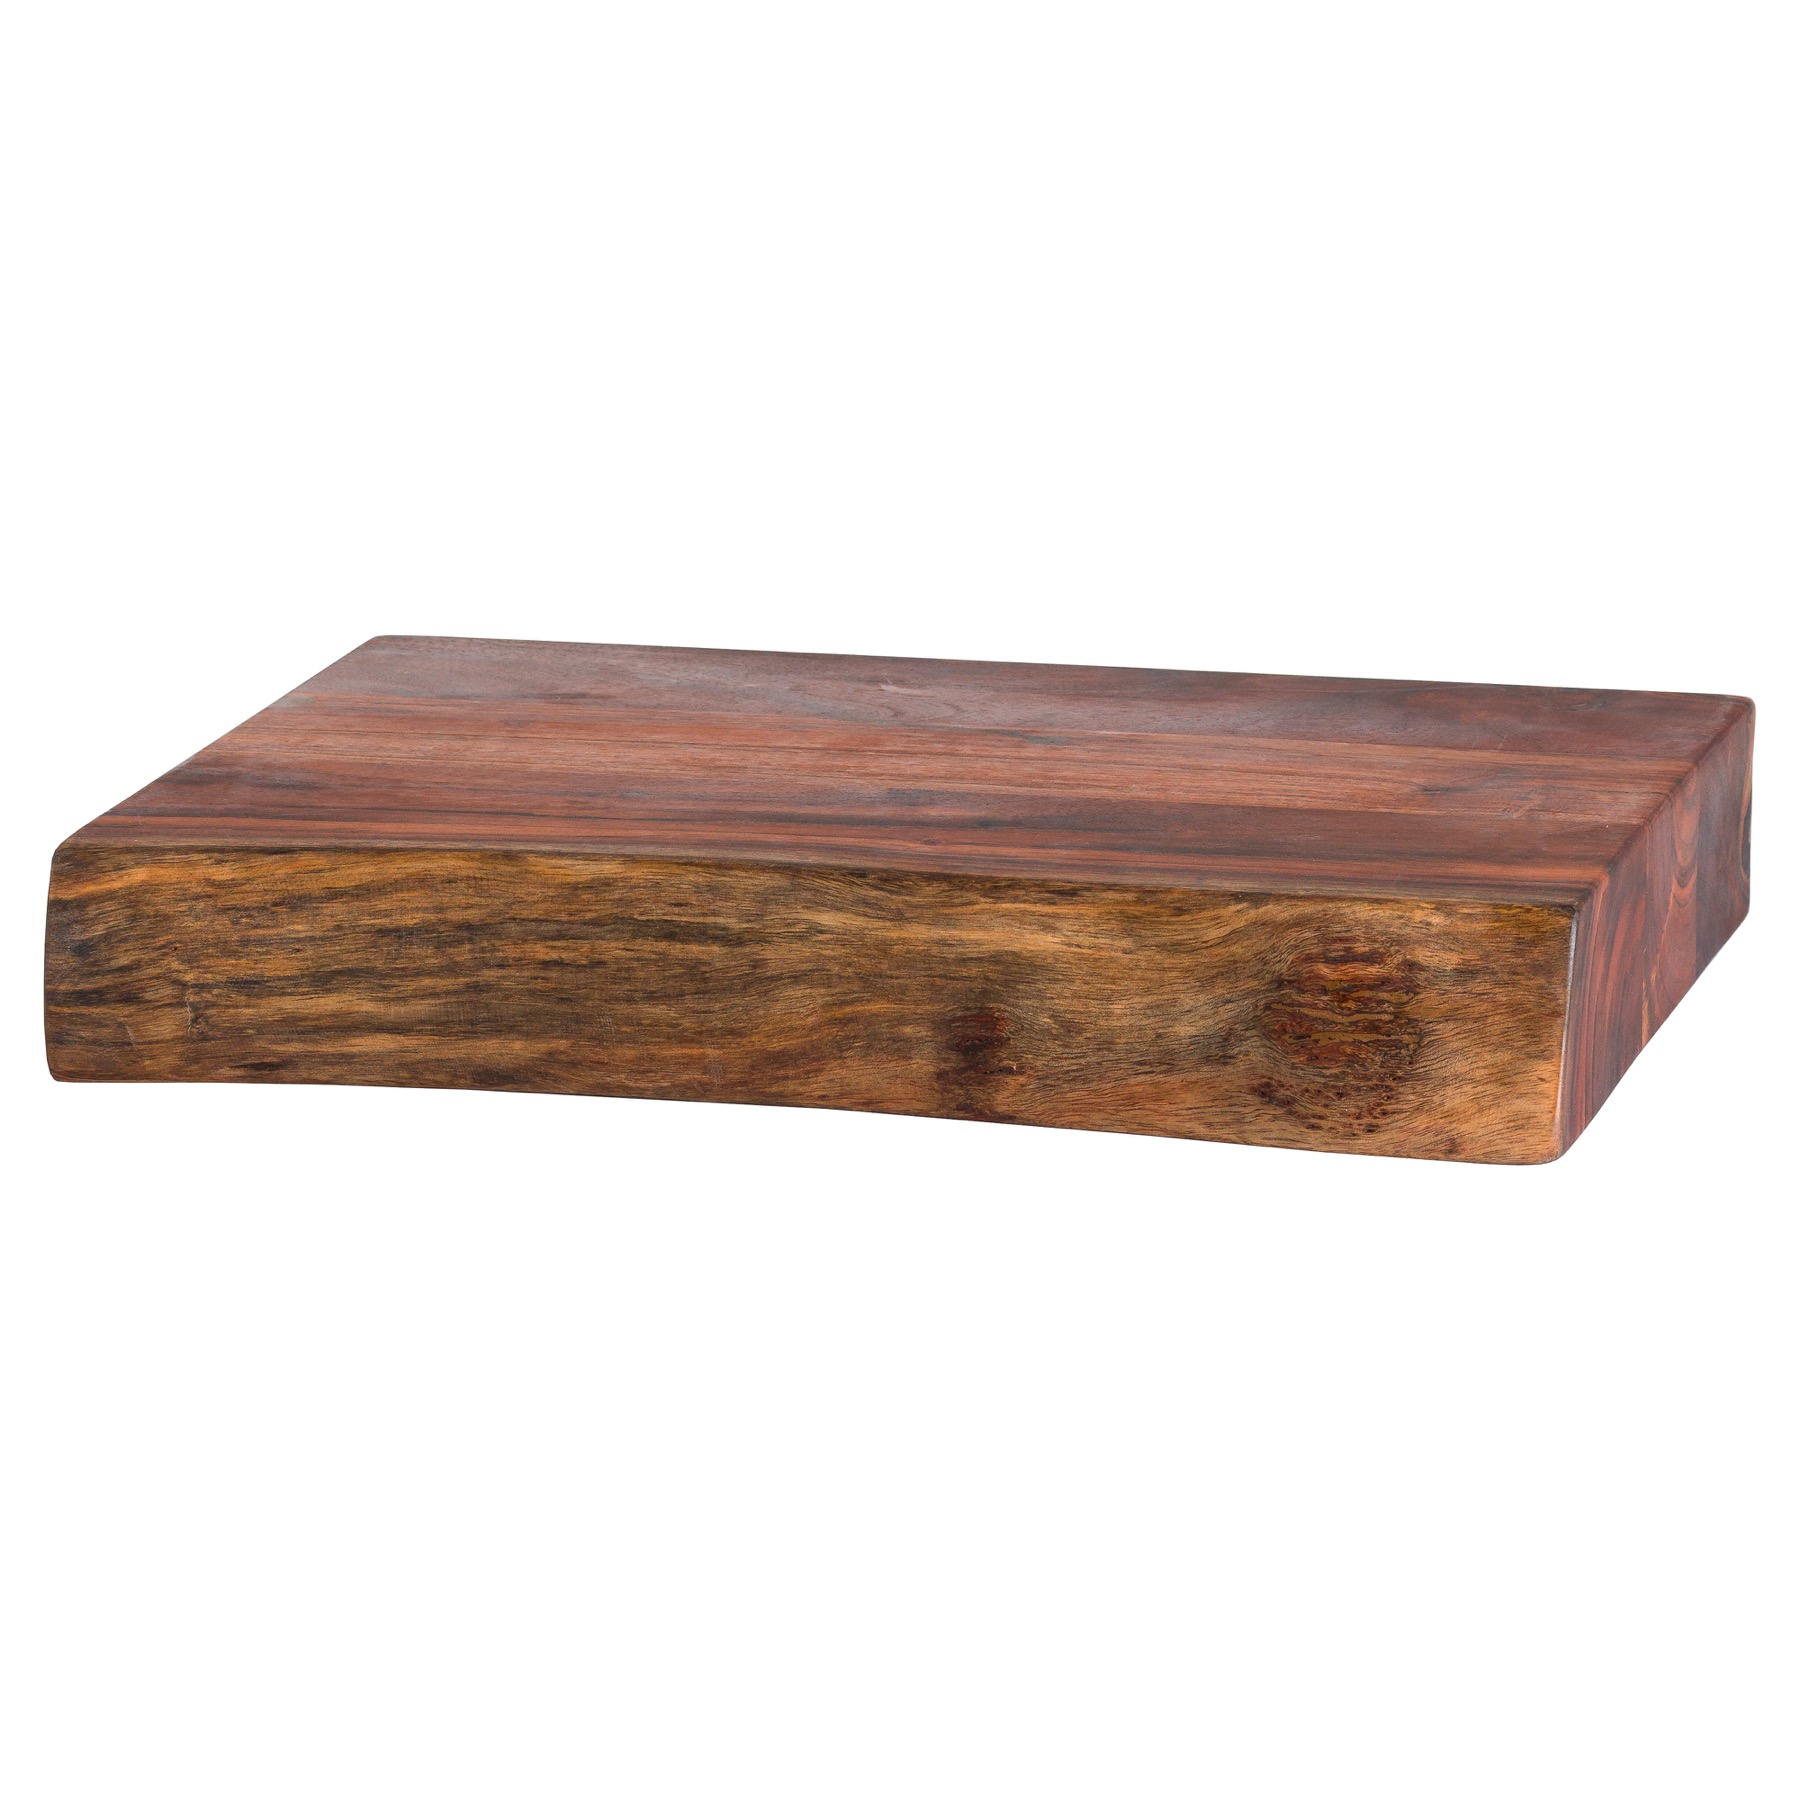 Live Edge Collection Pyman Chopping Board - Image 1